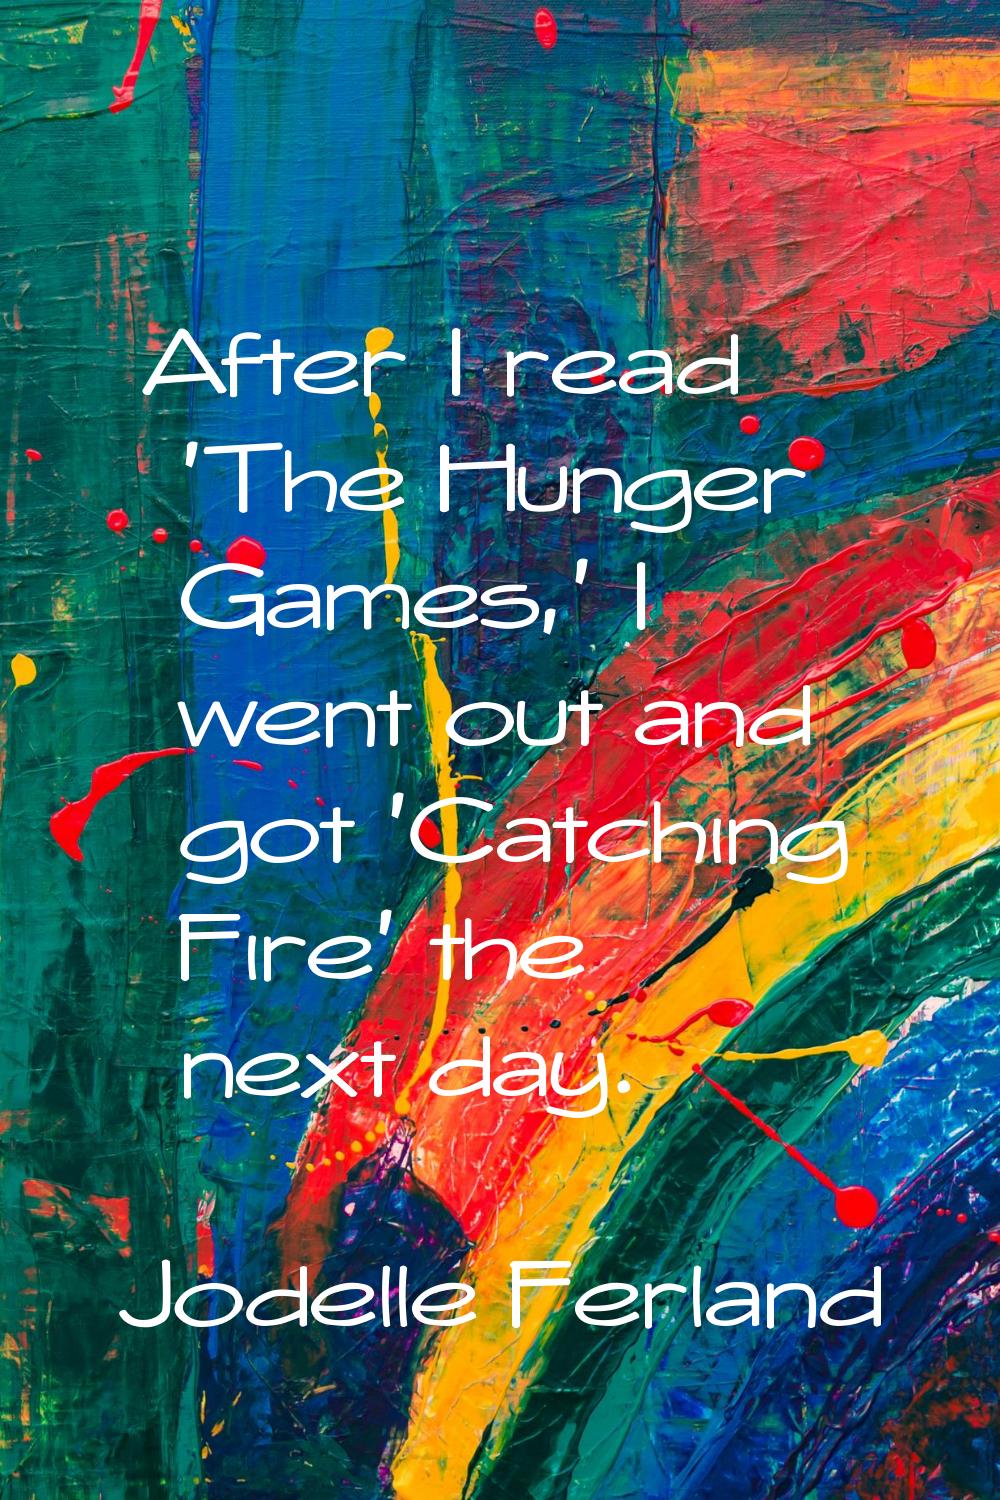 After I read 'The Hunger Games,' I went out and got 'Catching Fire' the next day.